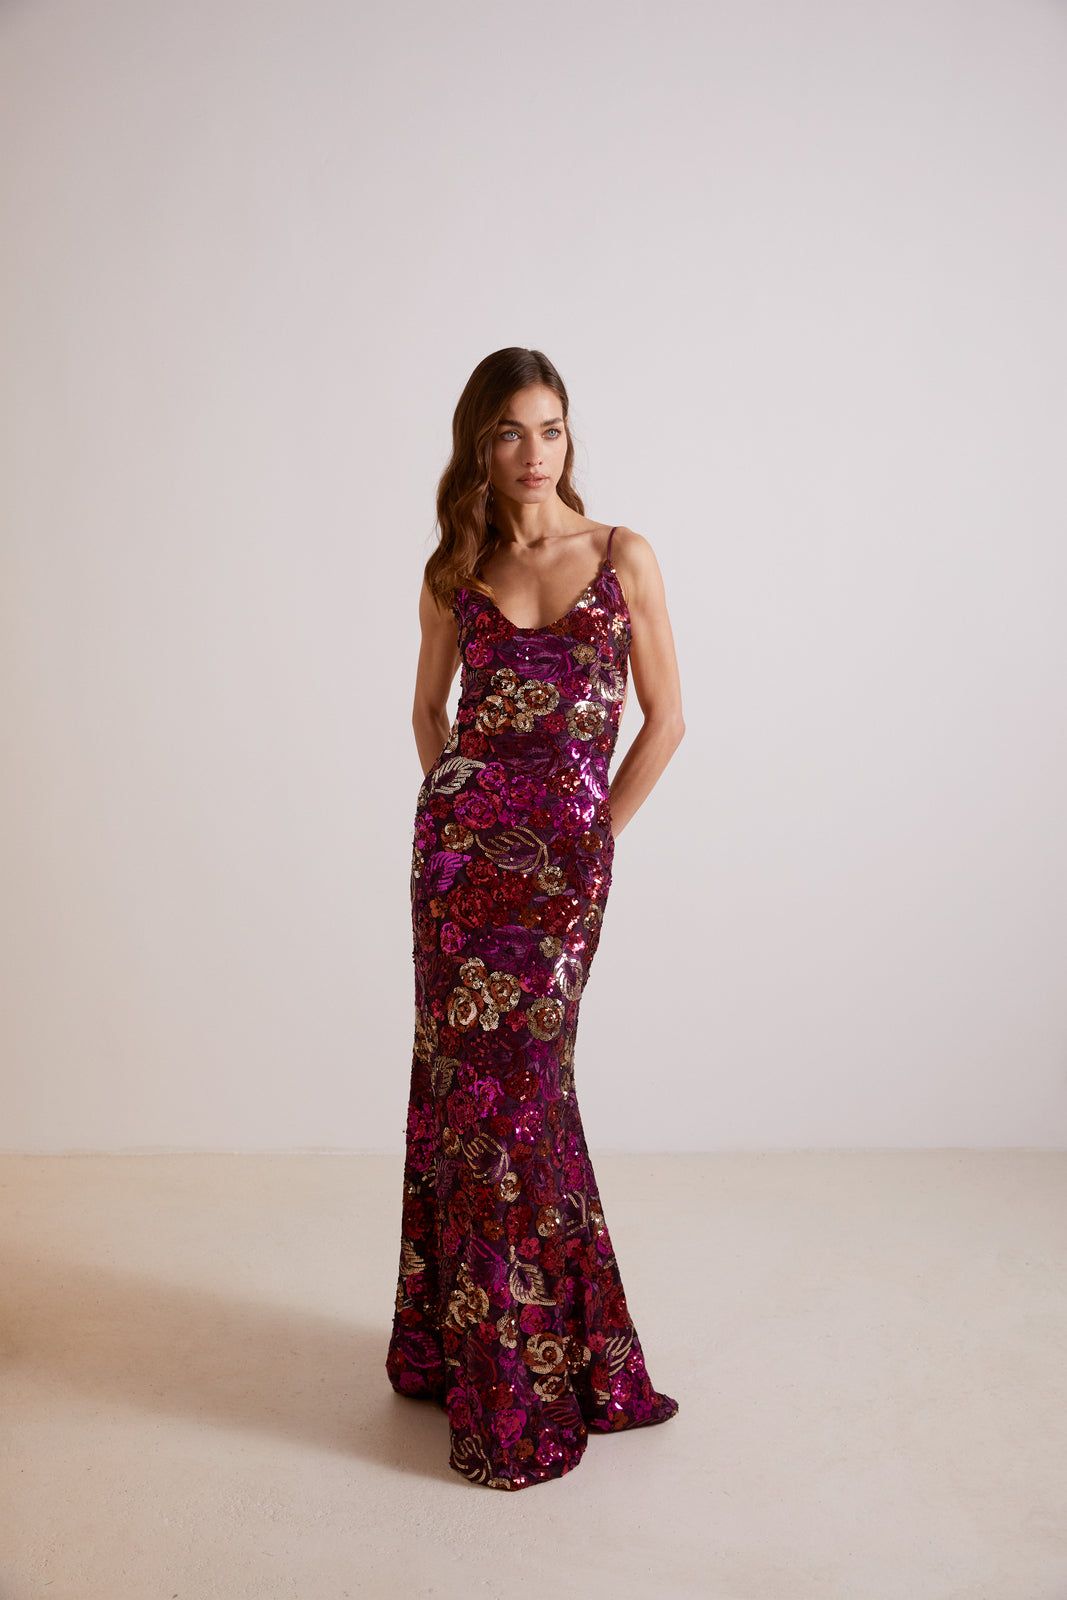 PURPLE SEQUIN DRESS WITH FLOWERS